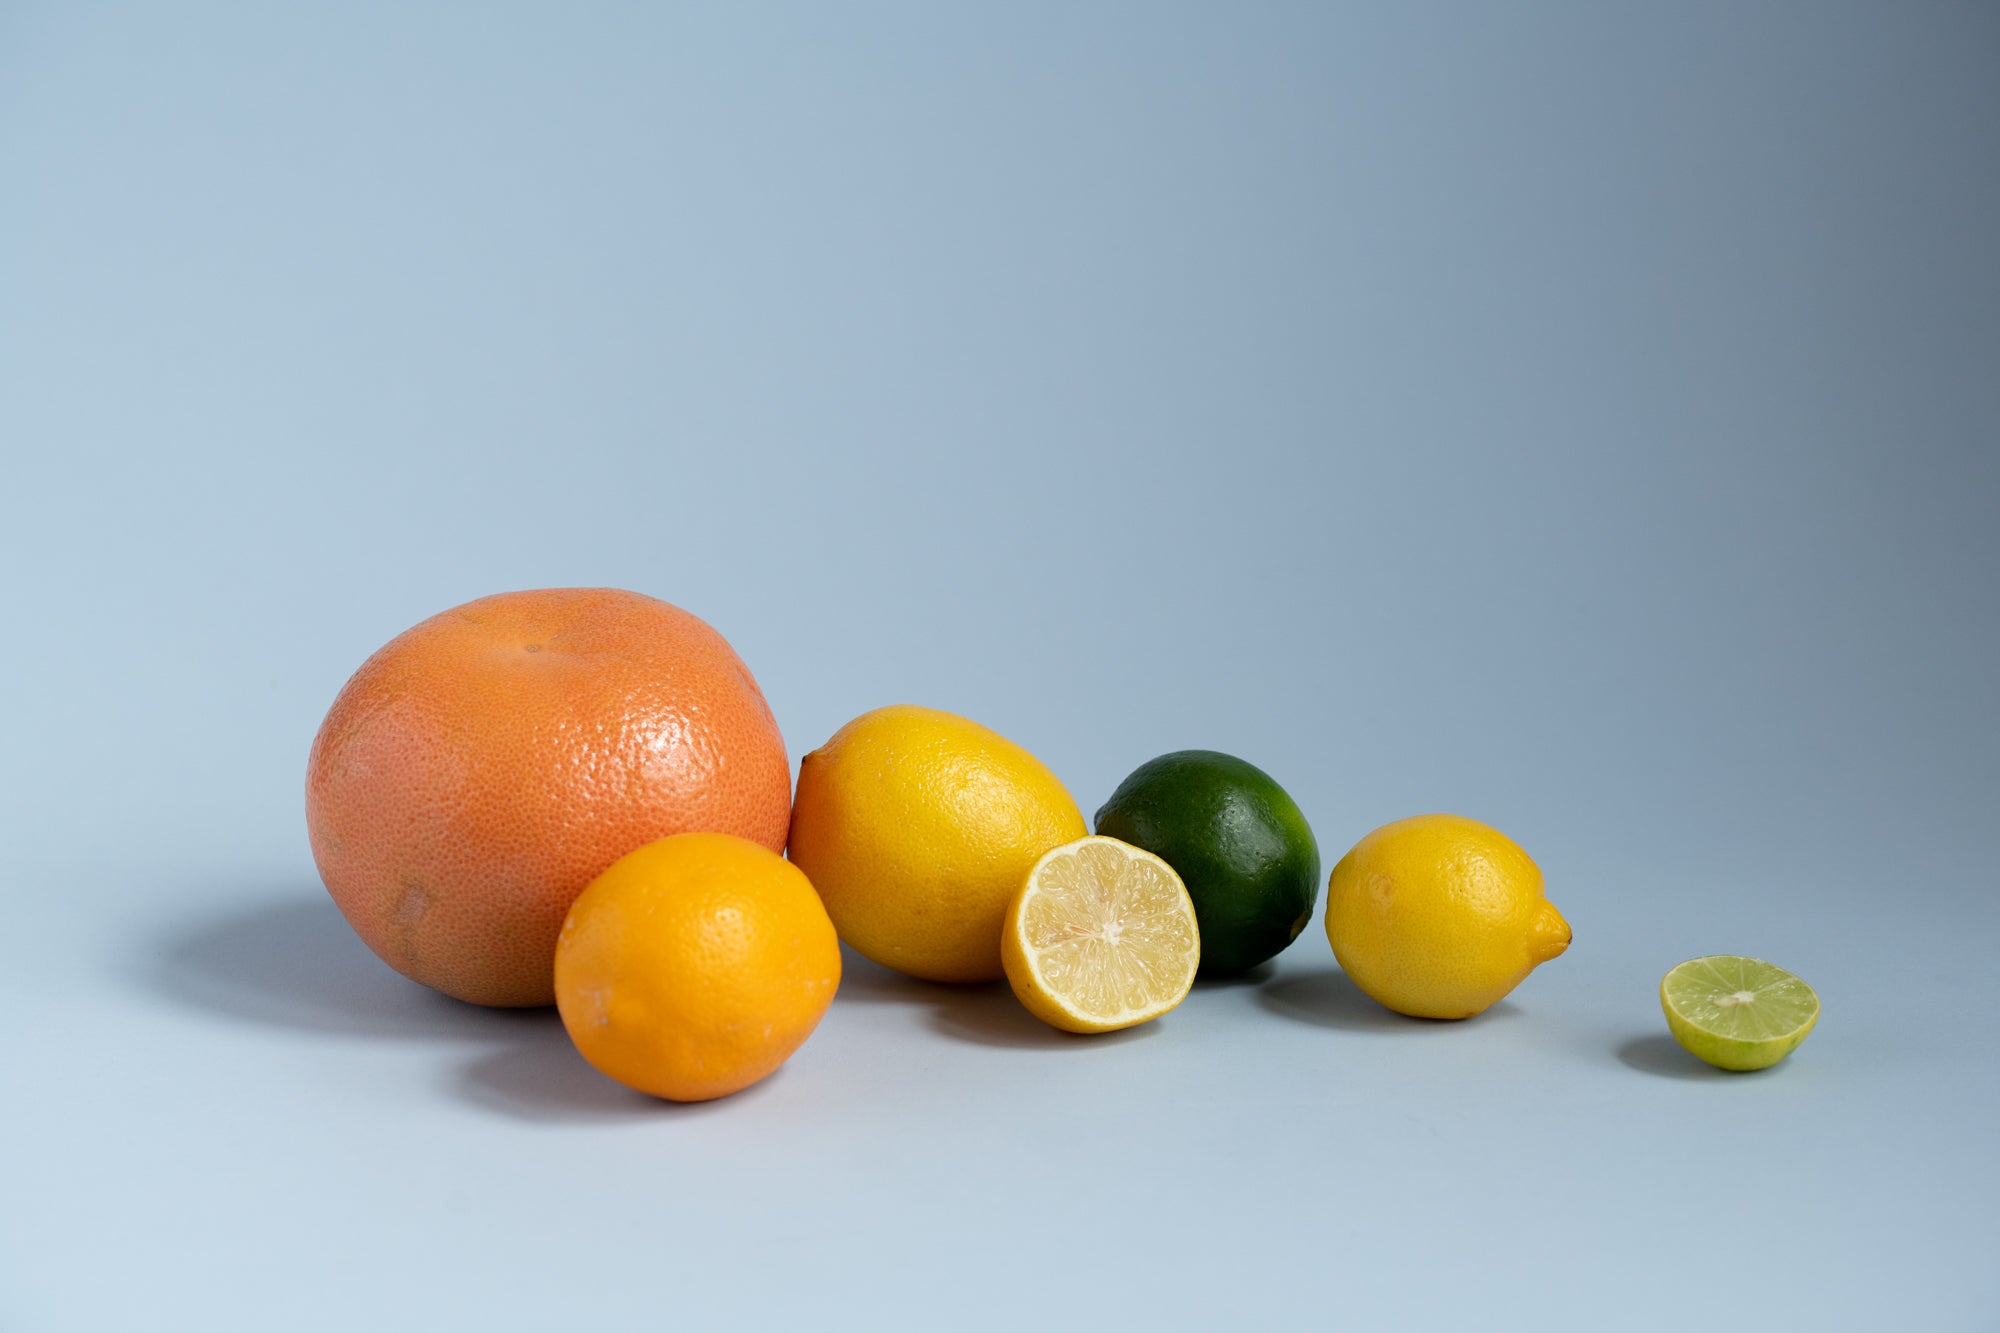 Various citrus fruits on a blue background